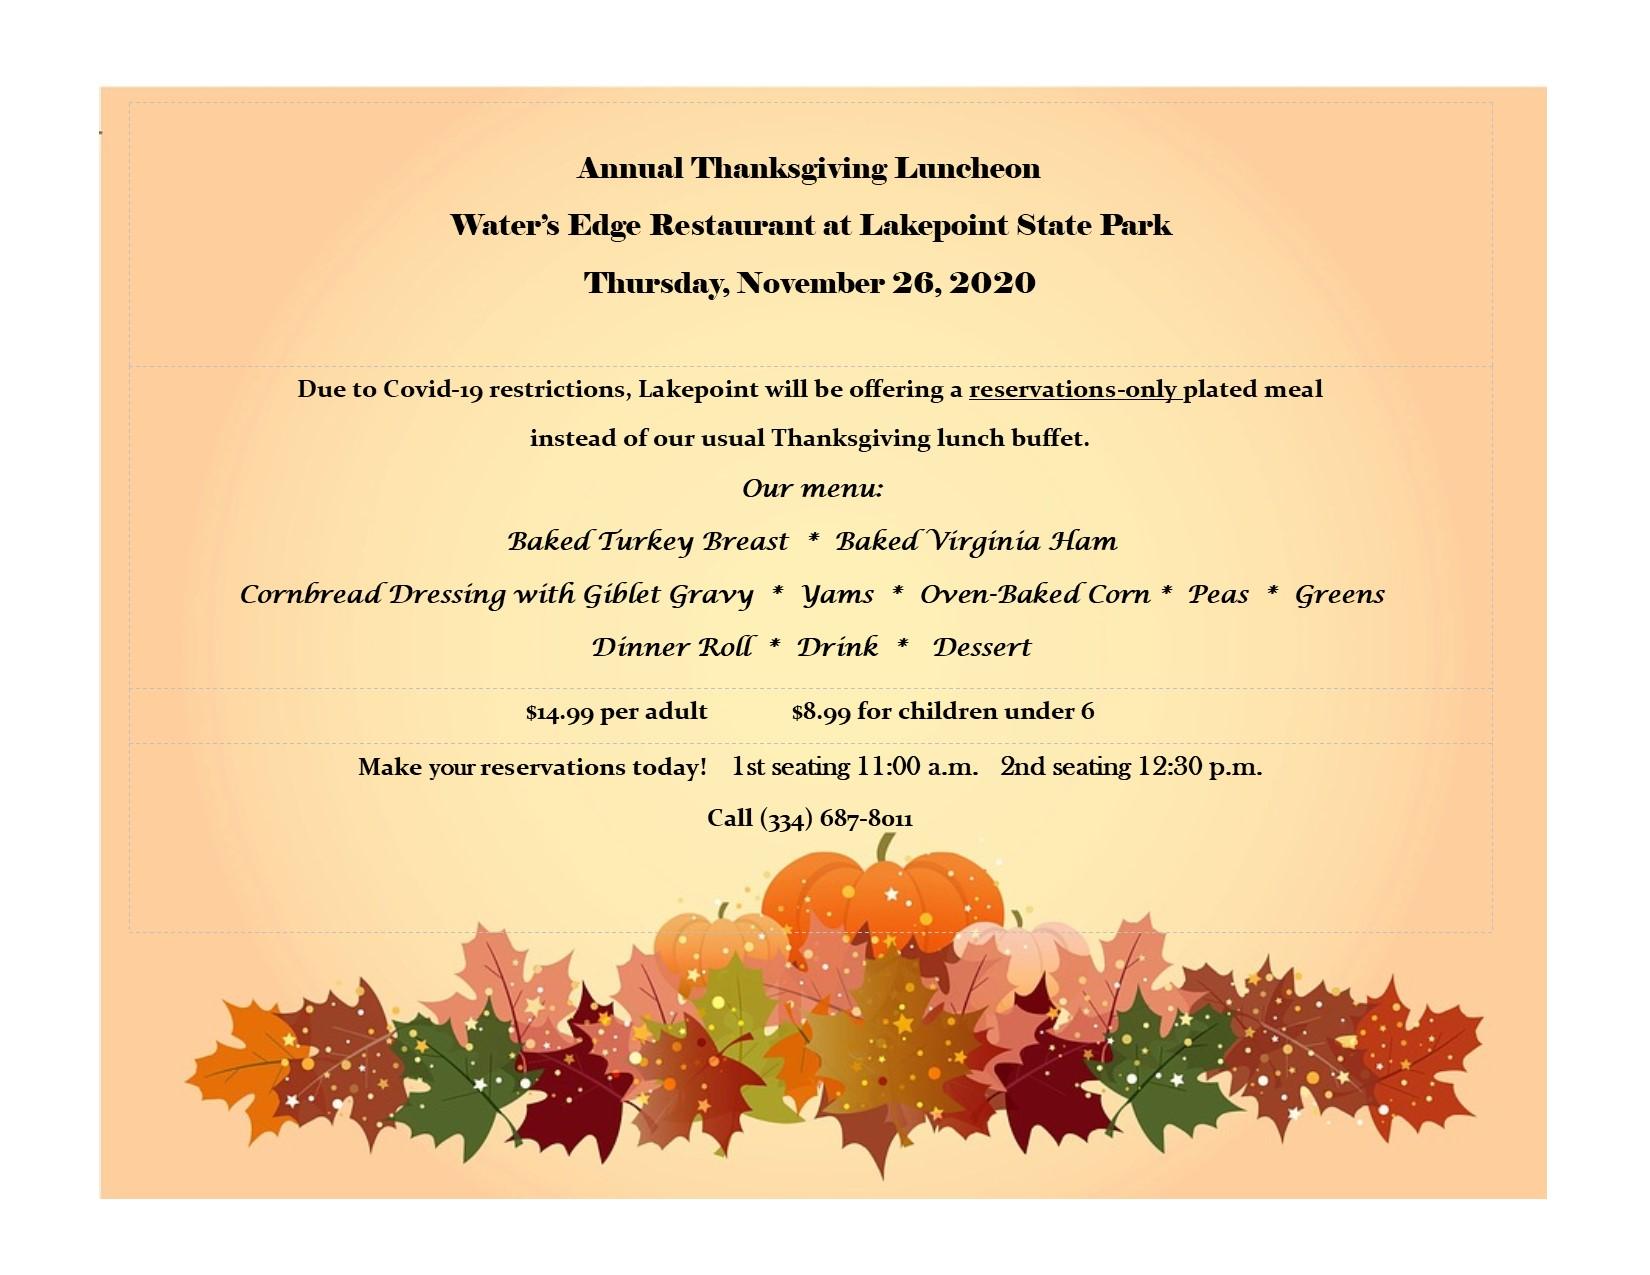 Lakepoint State Park Thanksgiving Luncheon 